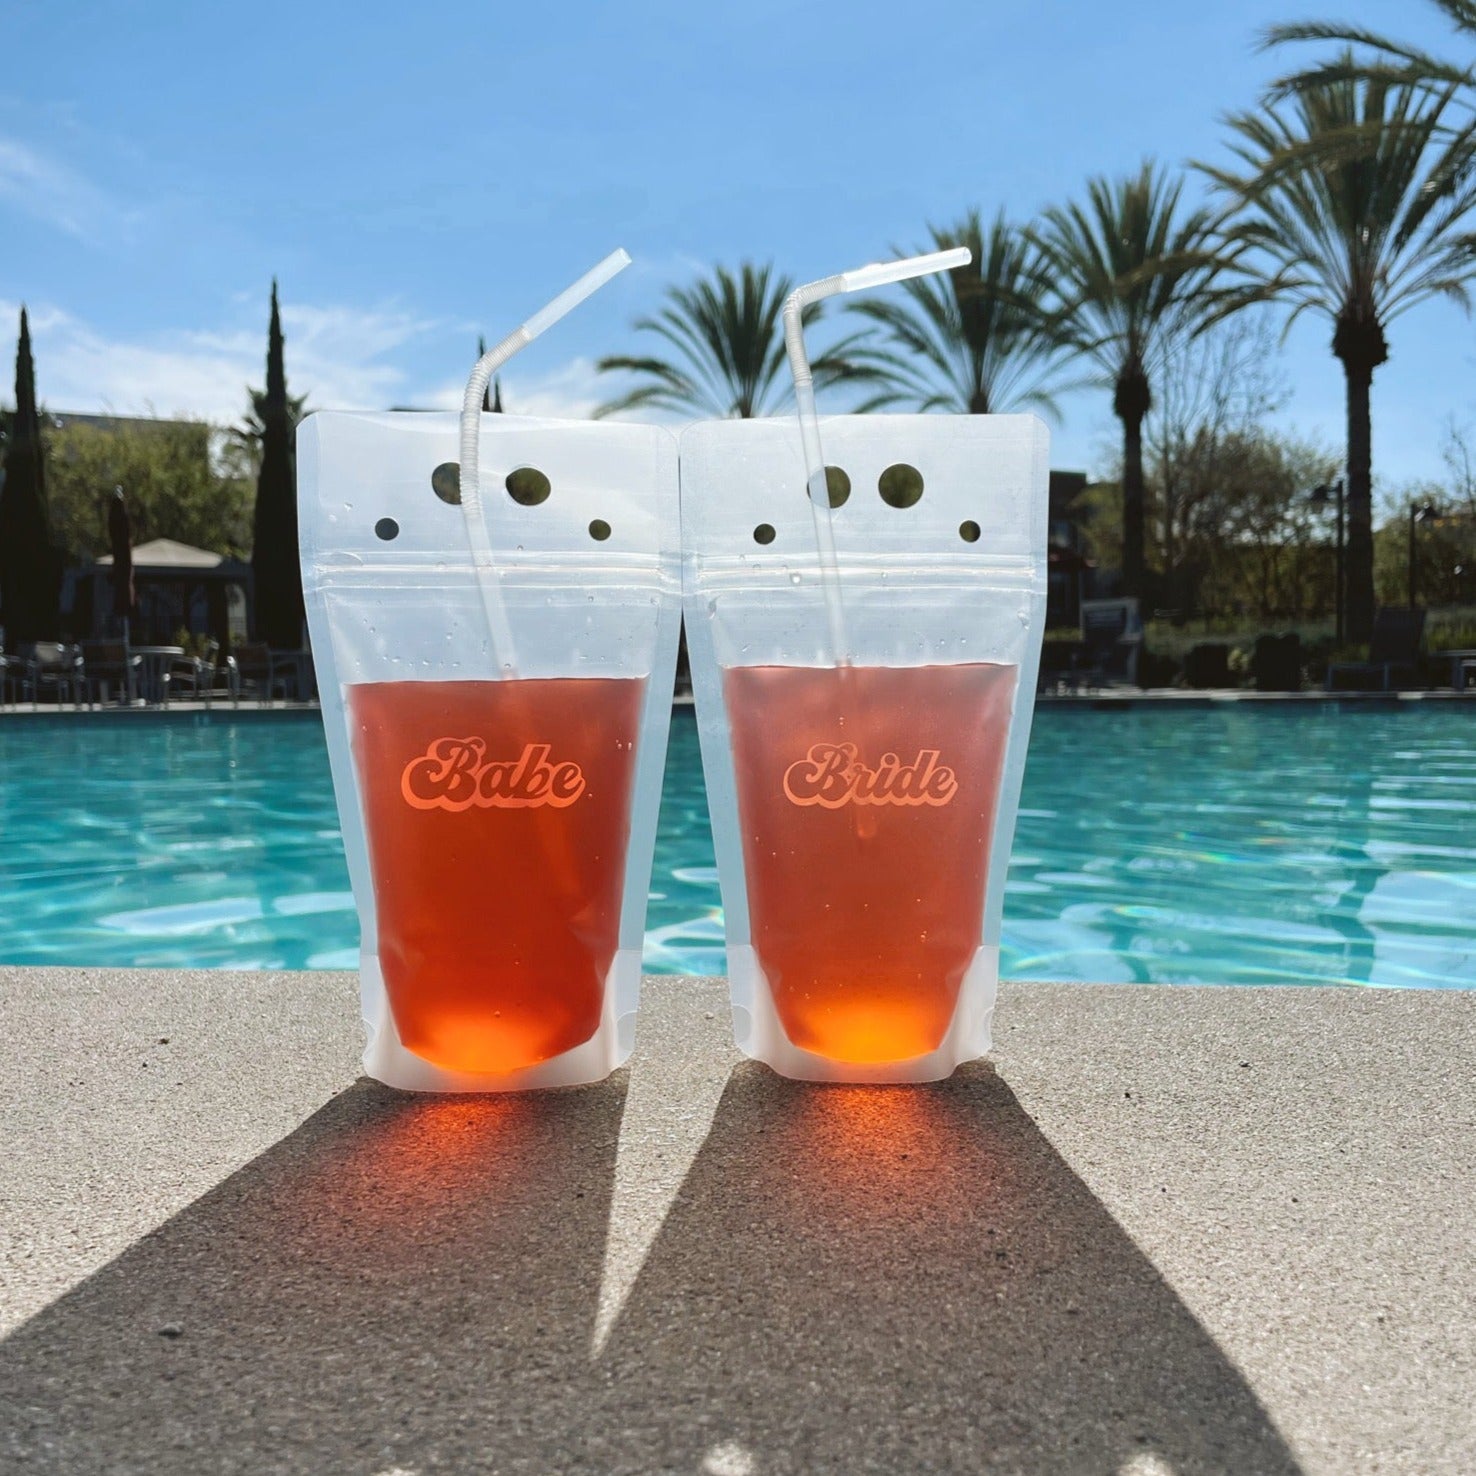 Two transparent plastic drink pouches standing upright next to a pool of water. Each pouch is holding a pink colored liquid. Water and palm trees are in the background as the pouches sit on a cement poolside. The left pouch says &quot;Babe&quot; in pink cursive text and the right pouch says &quot;Bride&quot; in white cursive text.